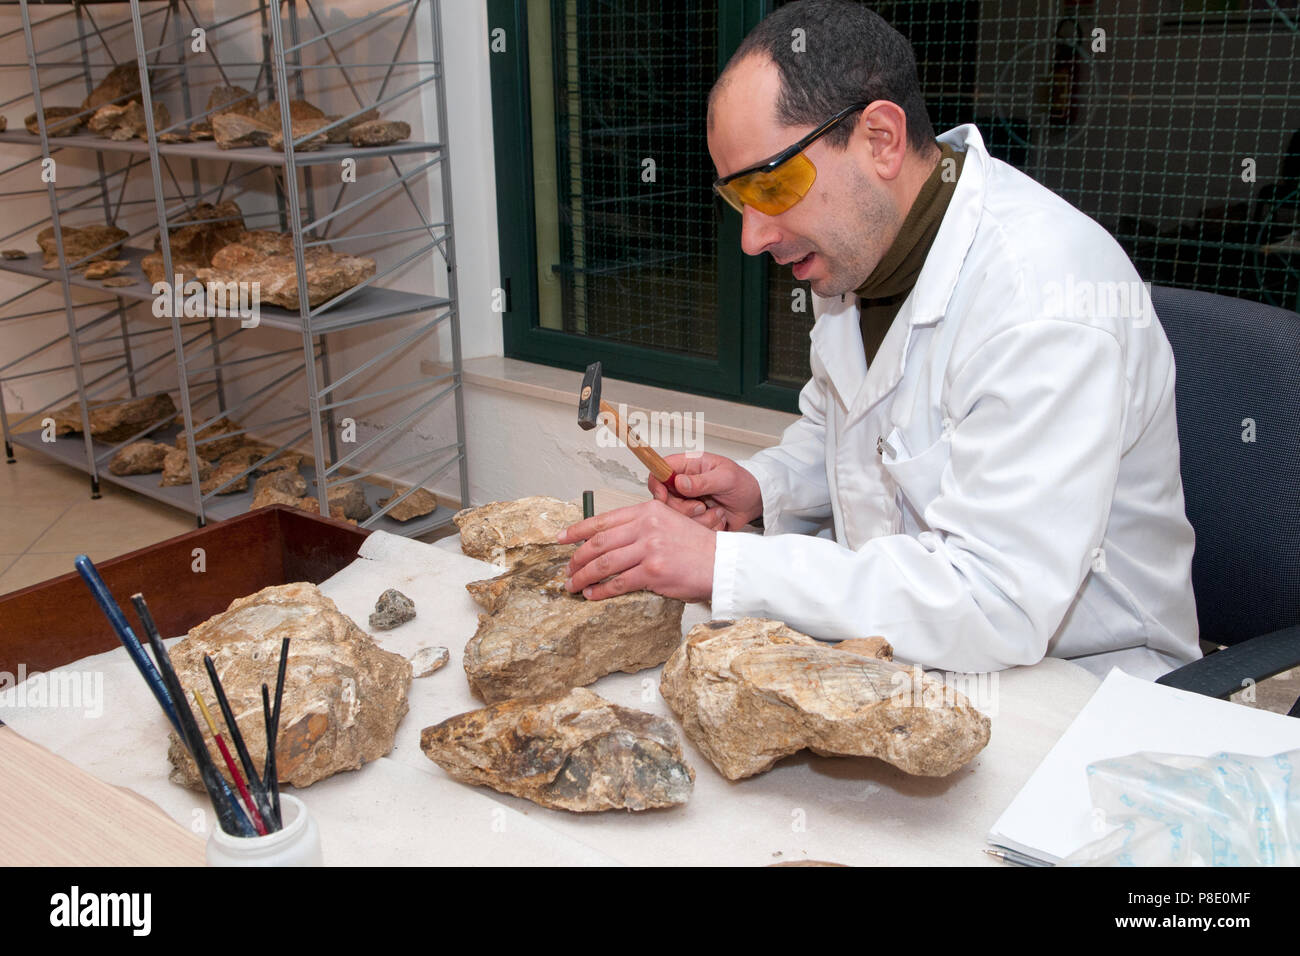 Archaeologist works a fossil from the ( paleoarcheocentro ) archaeological center of paleo Genoni, Sardinia, Italy Stock Photo